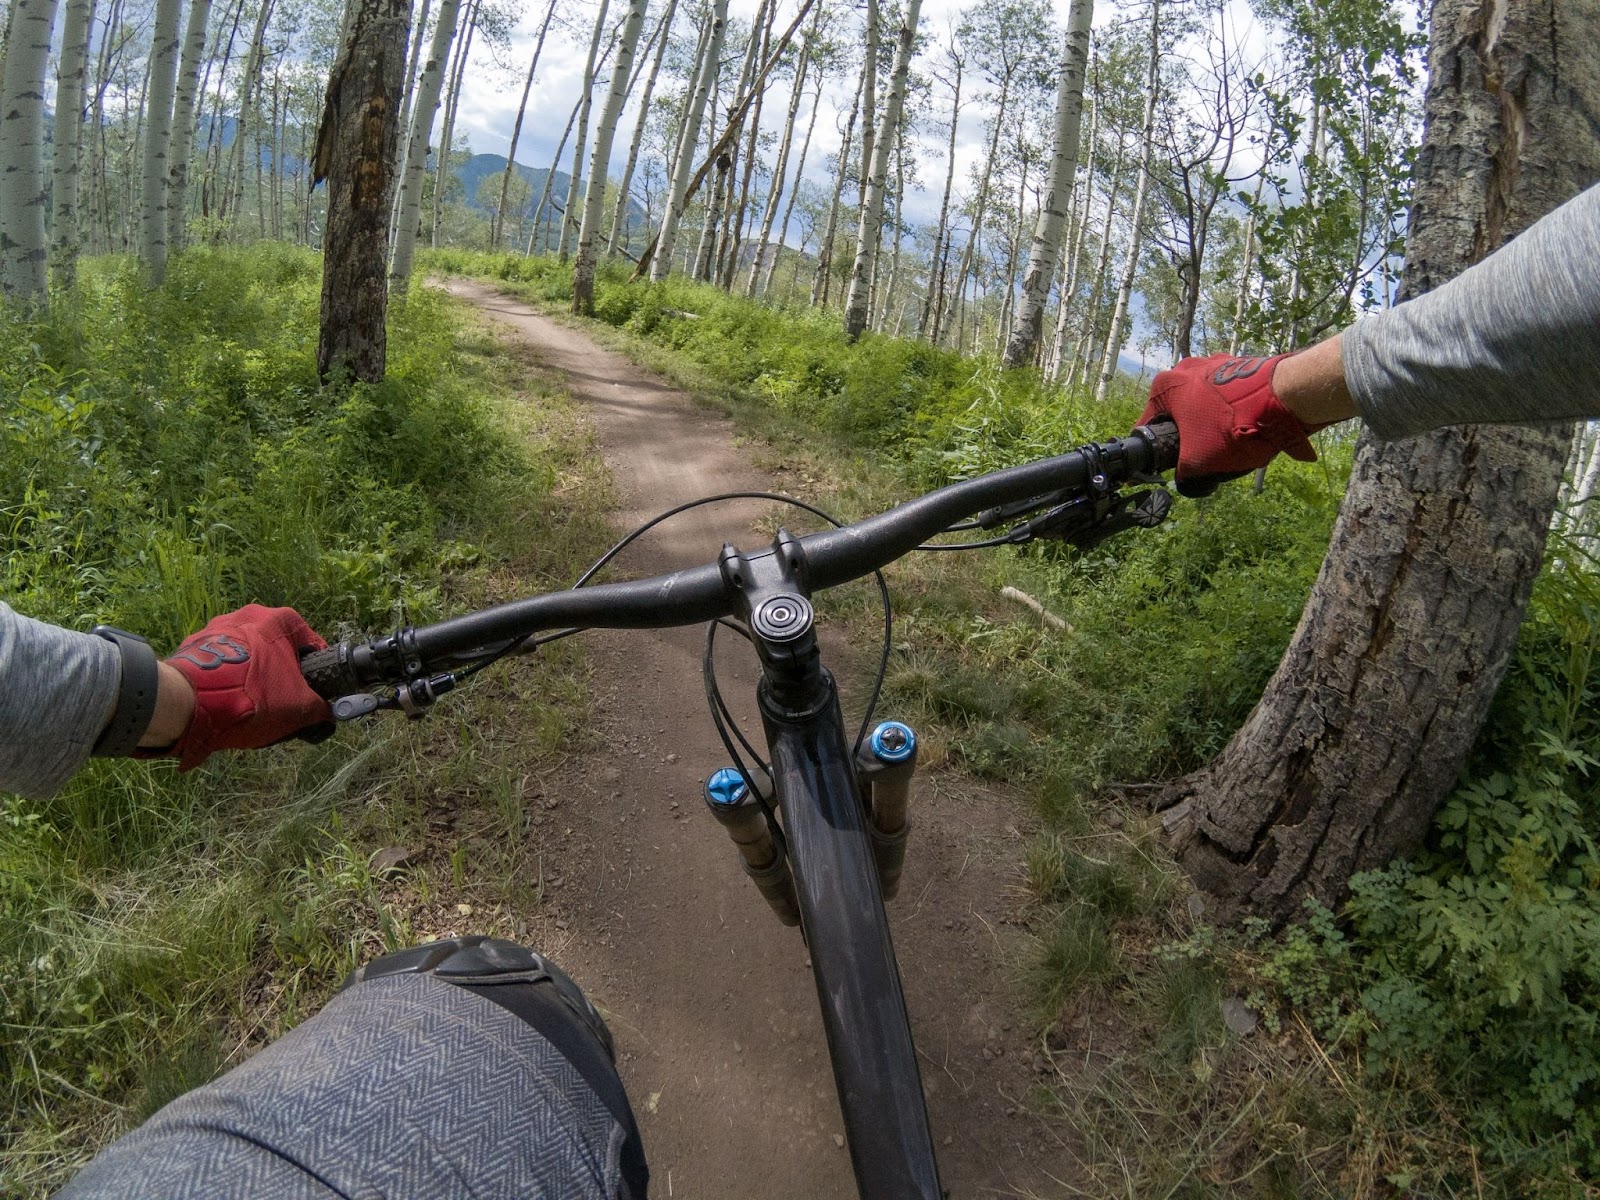 A front facing view of bike handle bars on a forested trail